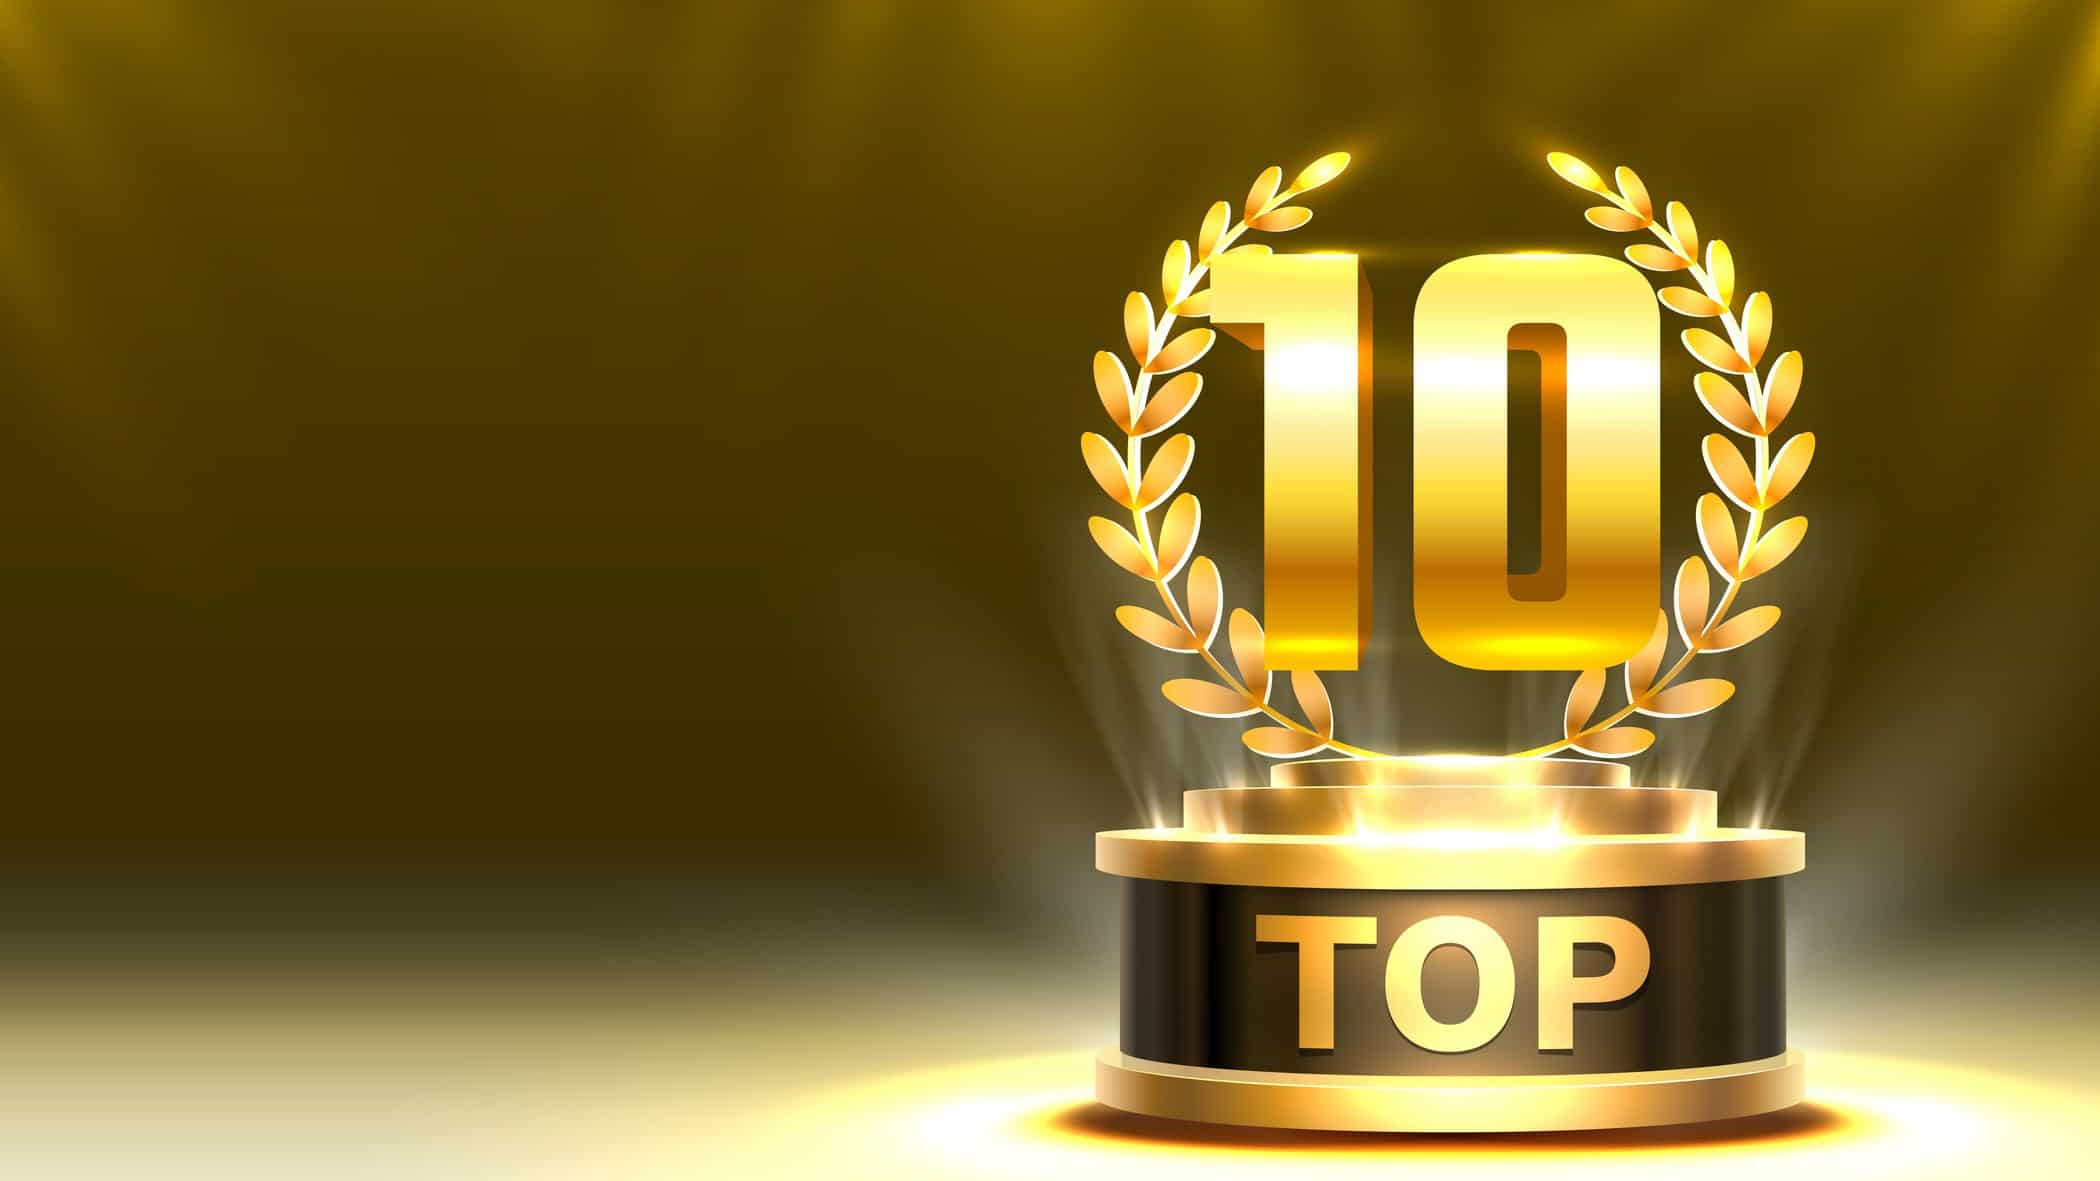 Here are the 10 most popular ETFs on the ASX